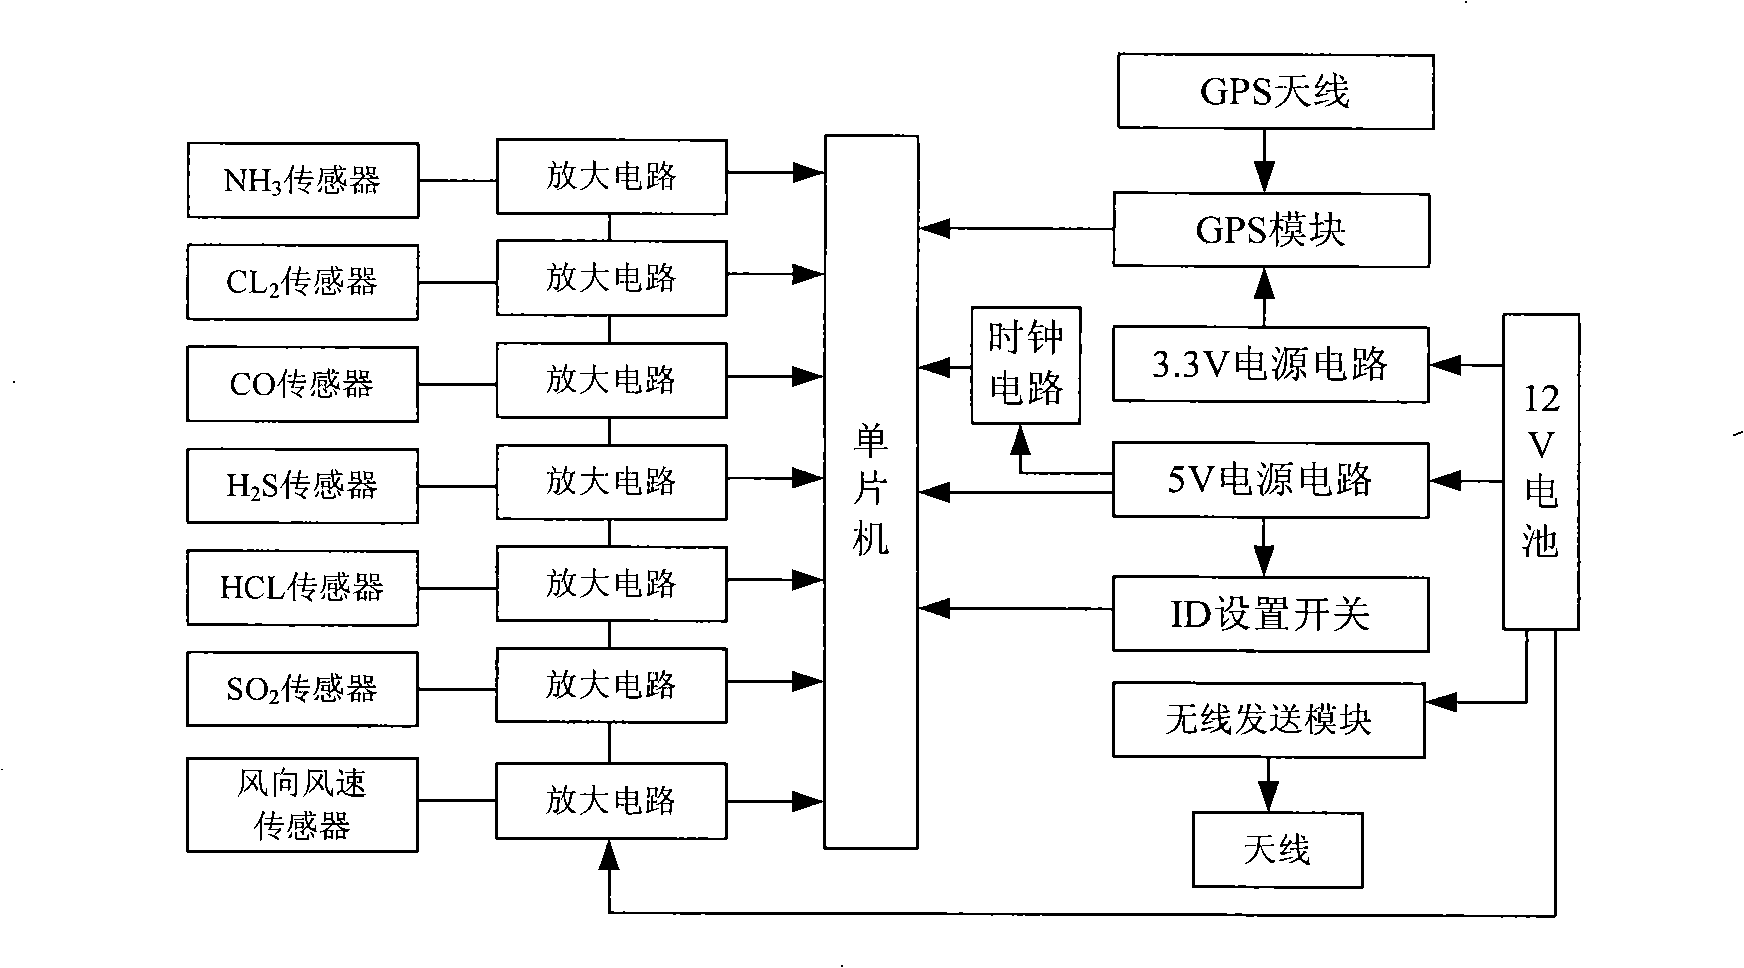 Emergency cooperative monitoring system for dangerous chemical leakage accident and method thereof